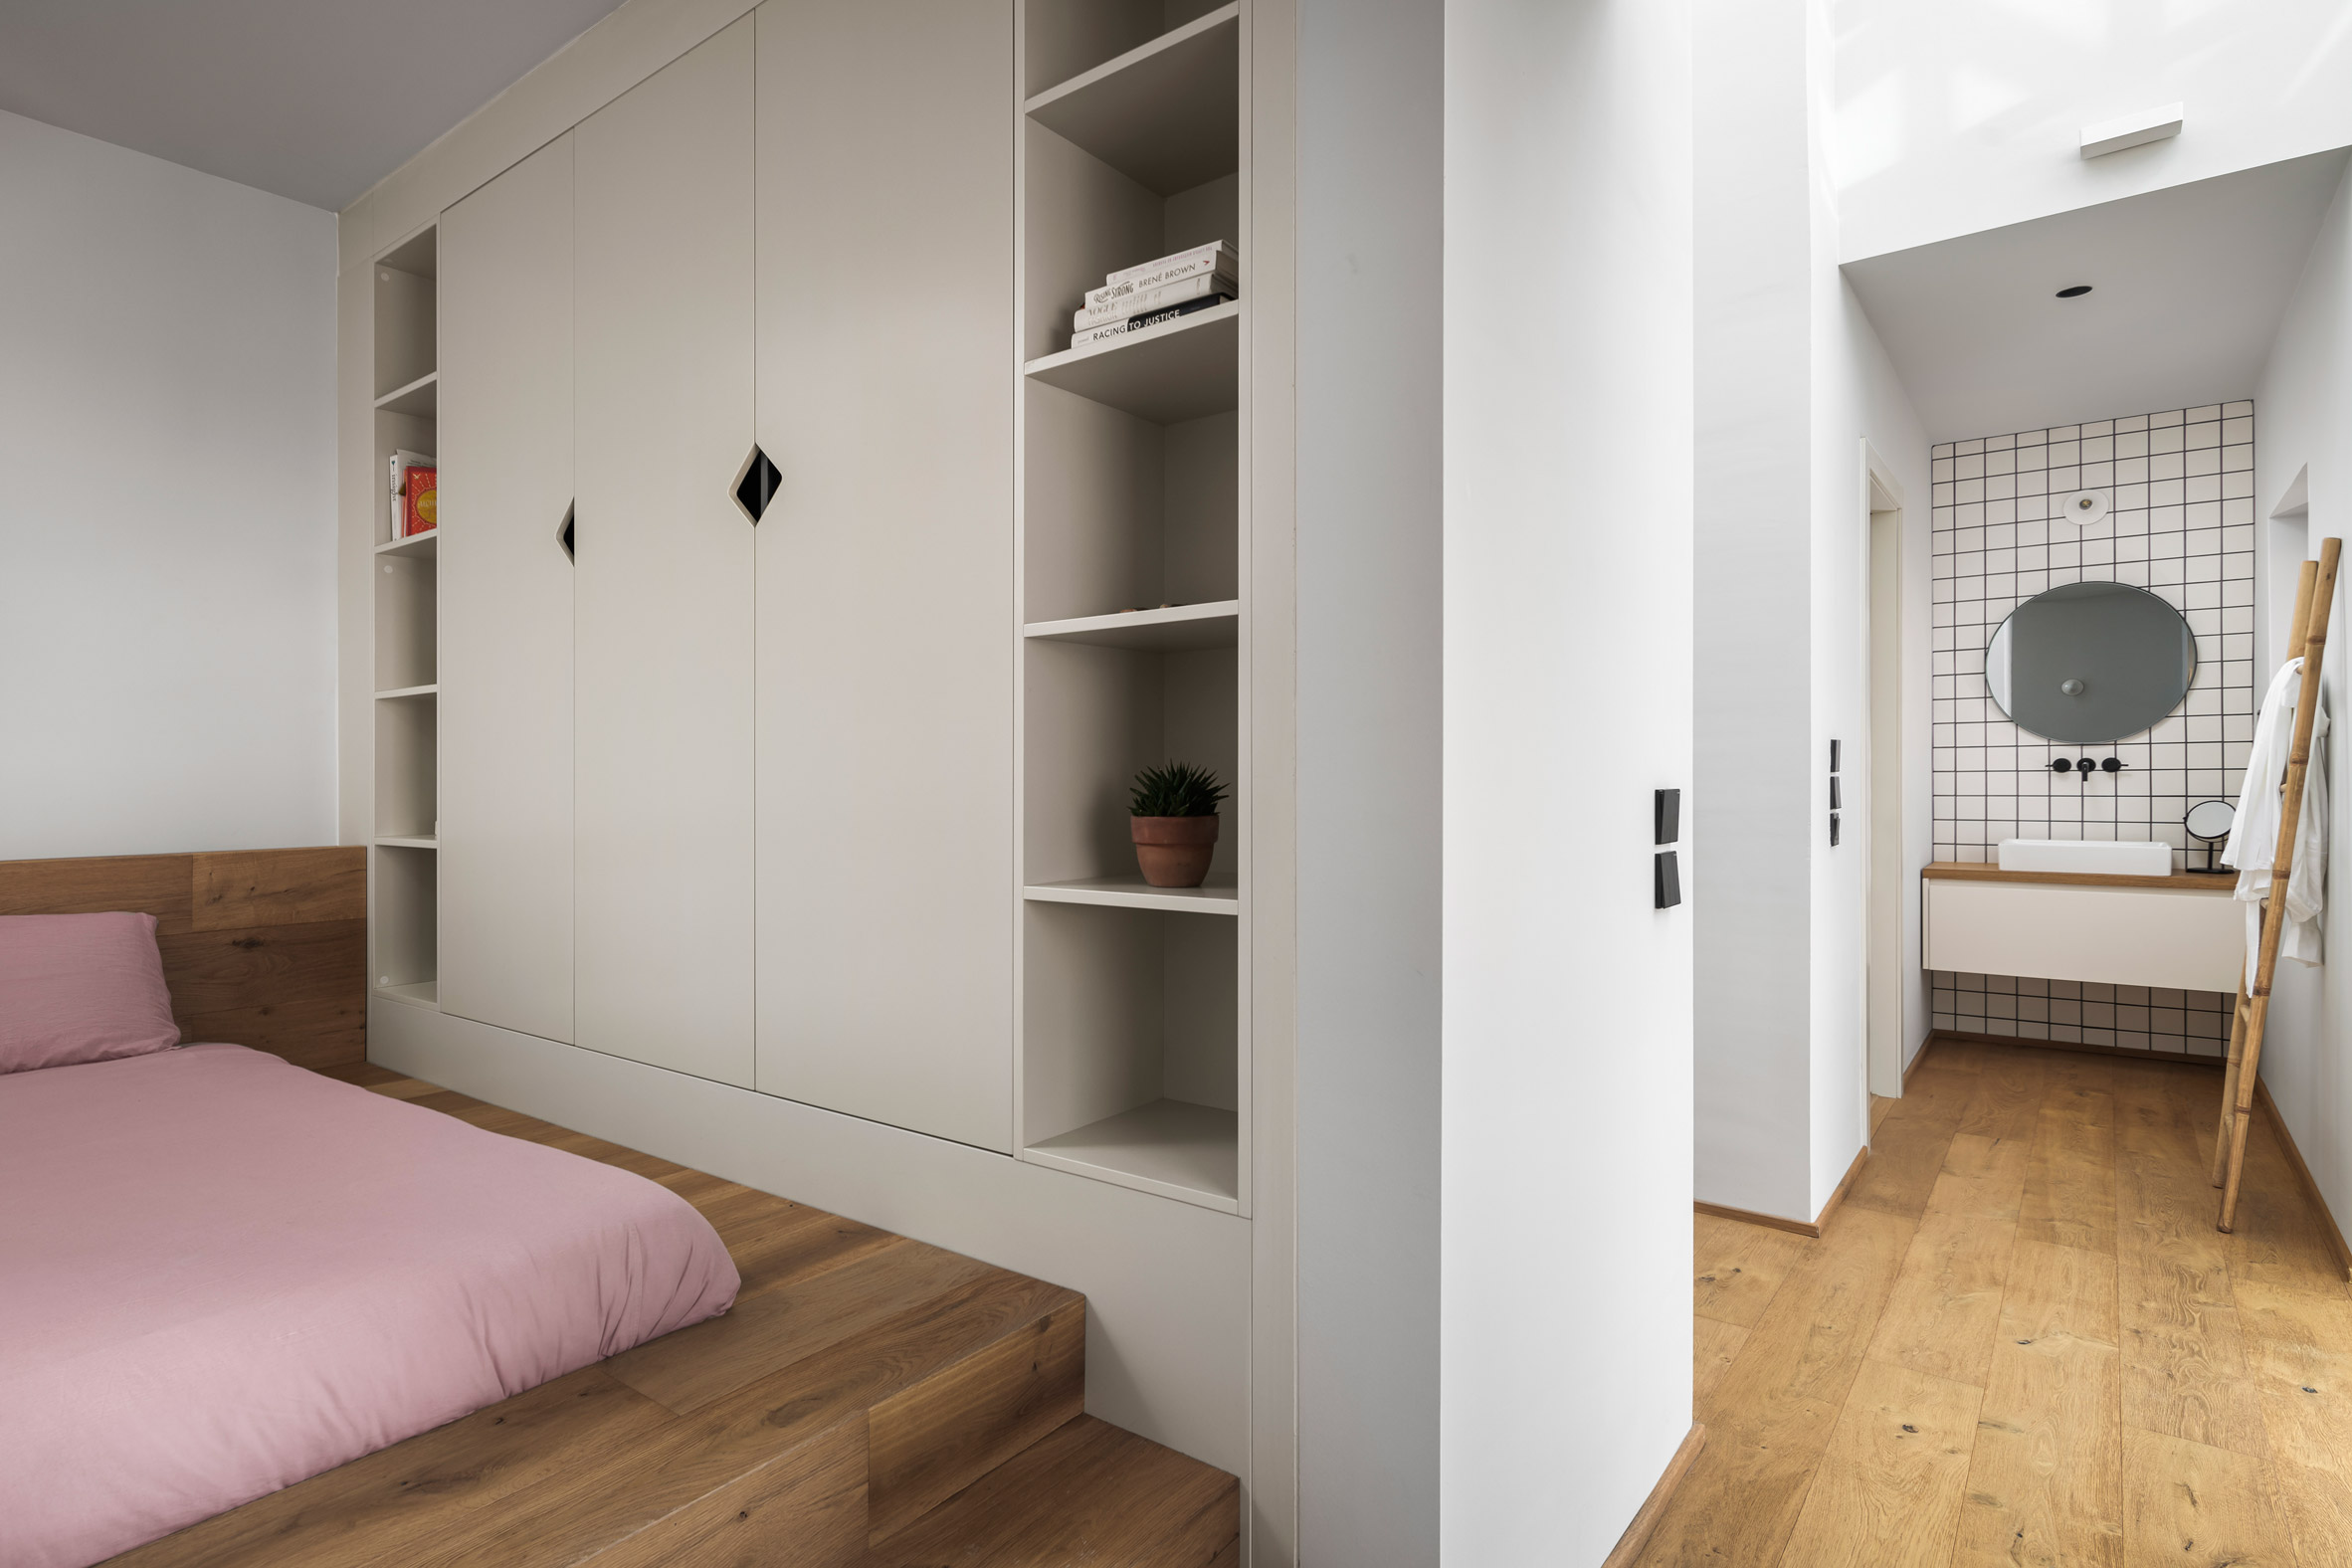 Bedroom inside La Serenissima house by Valentino Architects with raised wooden bed and small white-tiled bathroom area